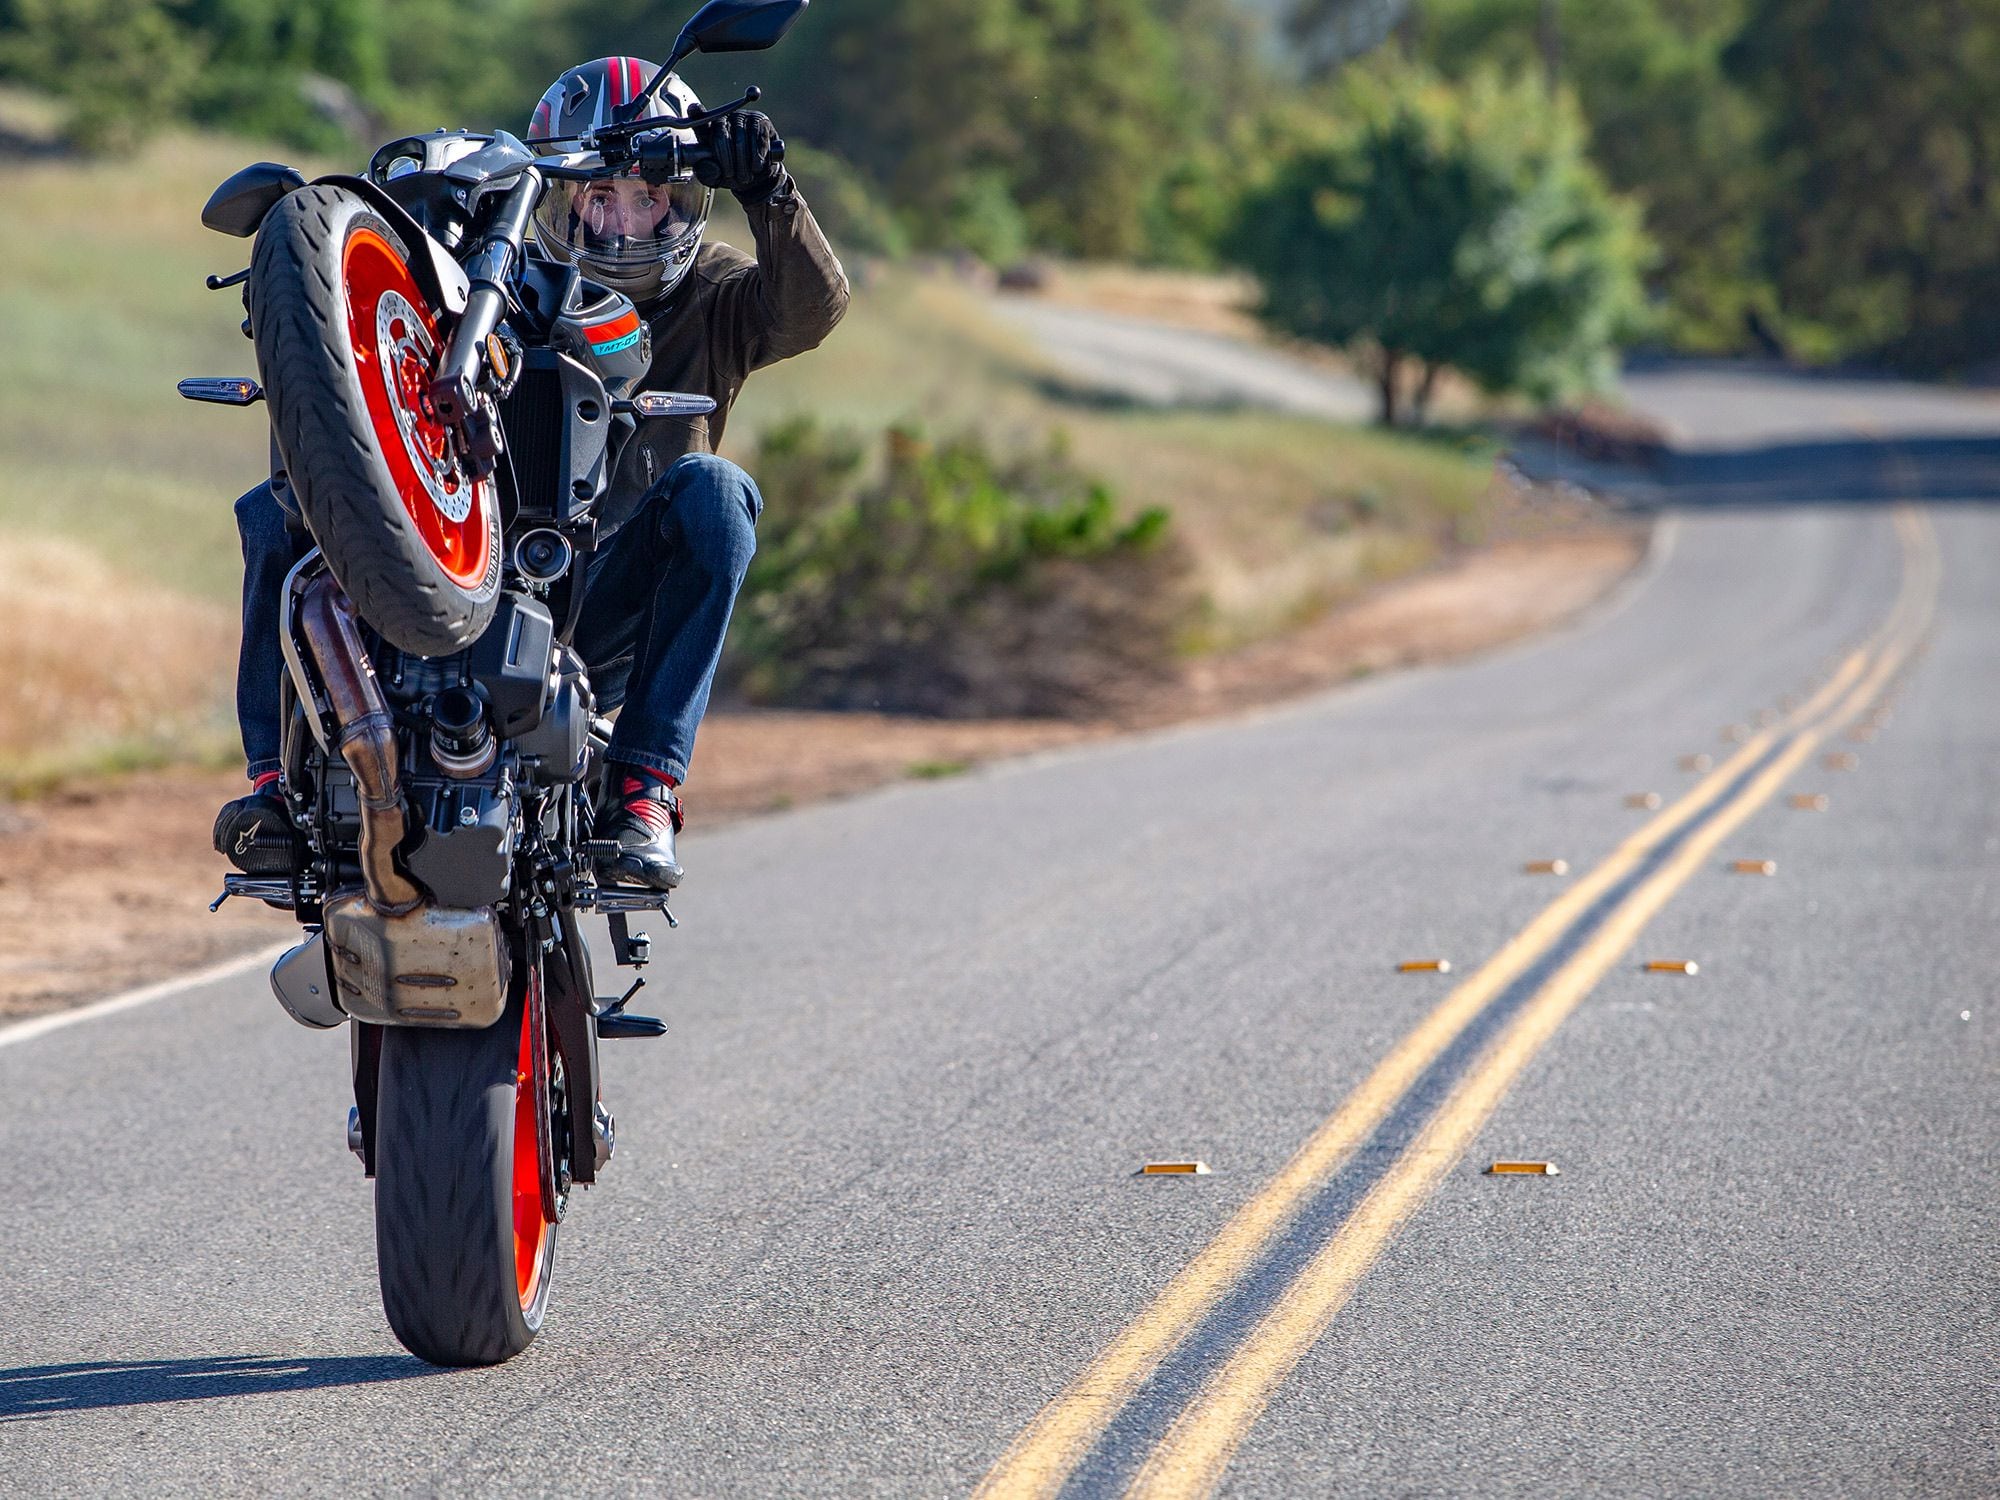 Short gearing and a flat torque curve ensures the MT-07′s hooligan character remains intact.